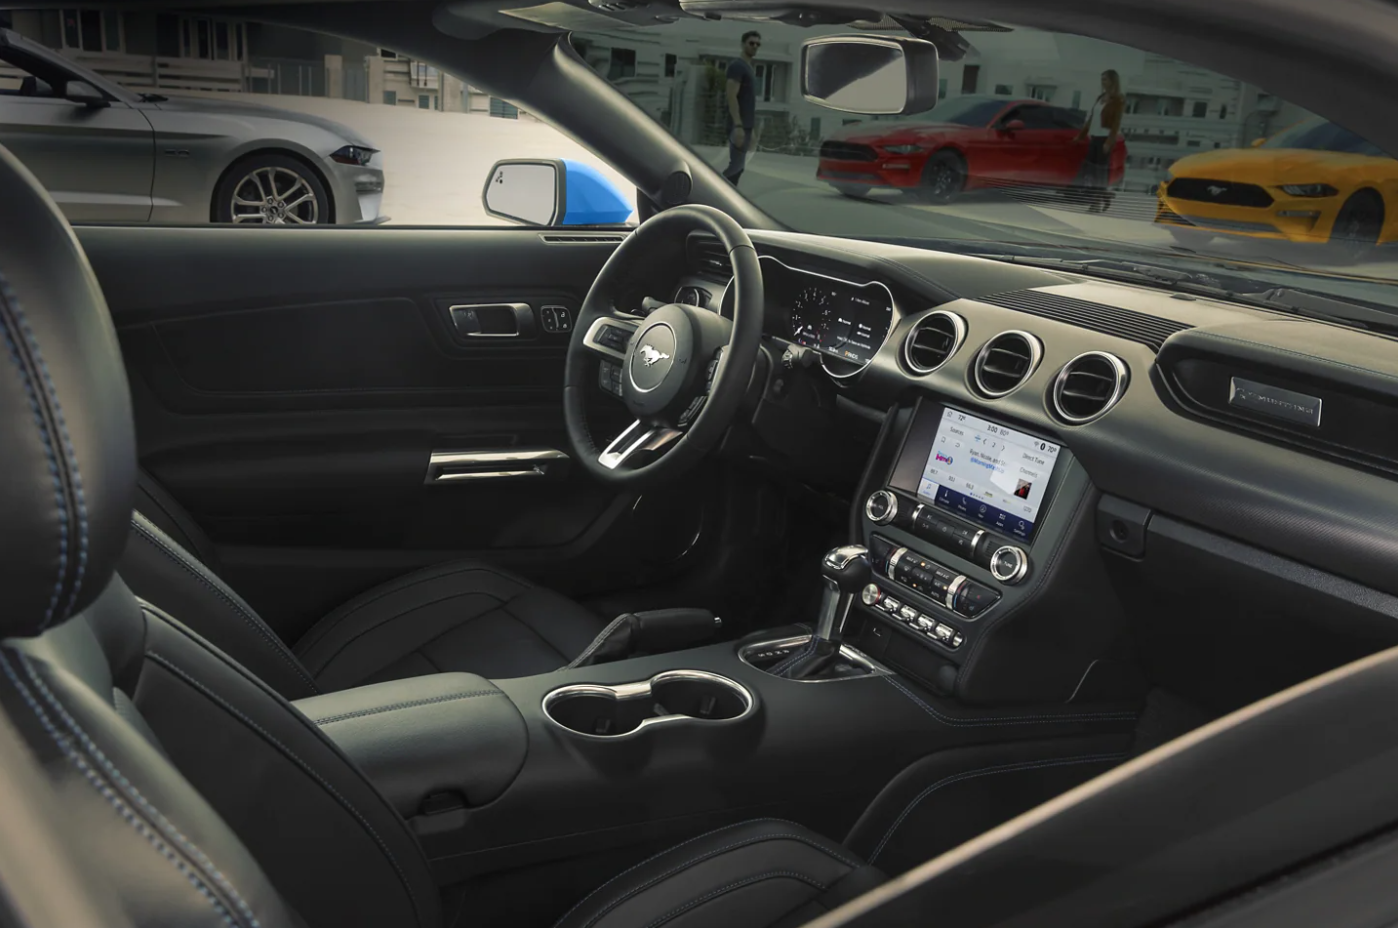 A view of the interior of a black leather upholstered and trimmed 2022 Ford Mustang with infotainment center mounted in the center of the dash, cupholders, and center console.